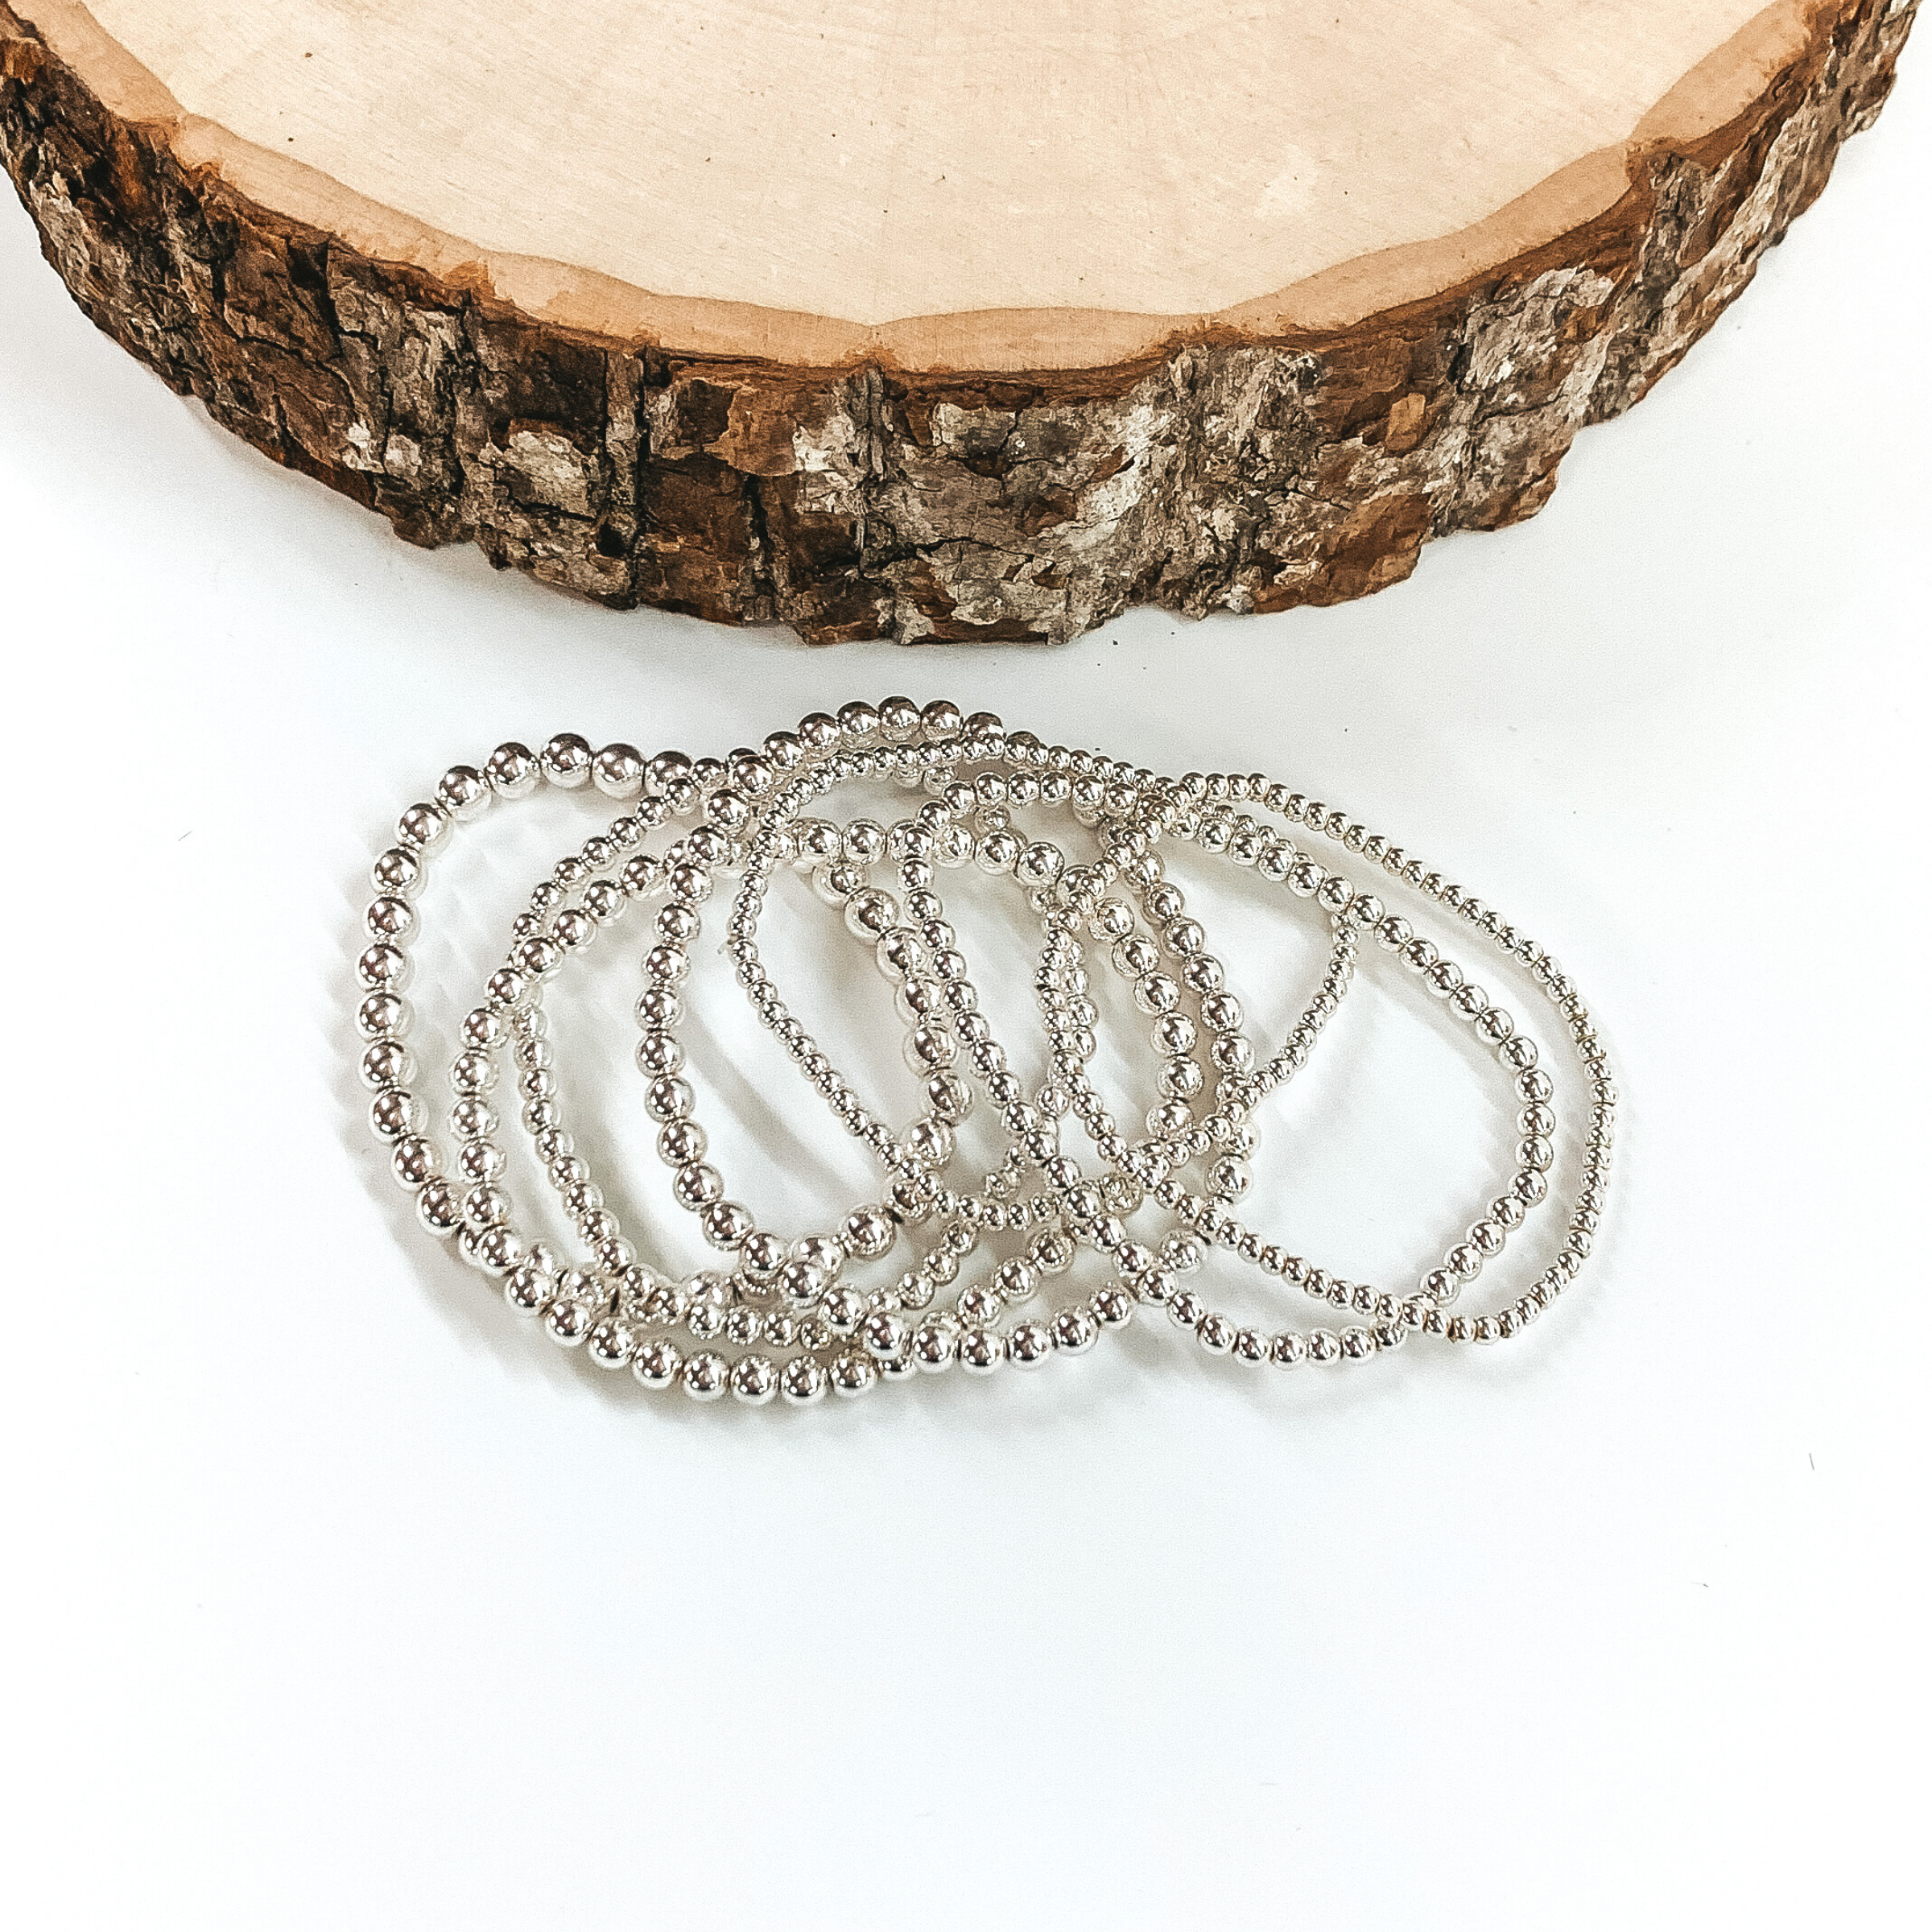 A set of seven silver beaded bracelets ranging in different size beads. These bracelets are laying on top of each other in front of a piece of wood on a white background.